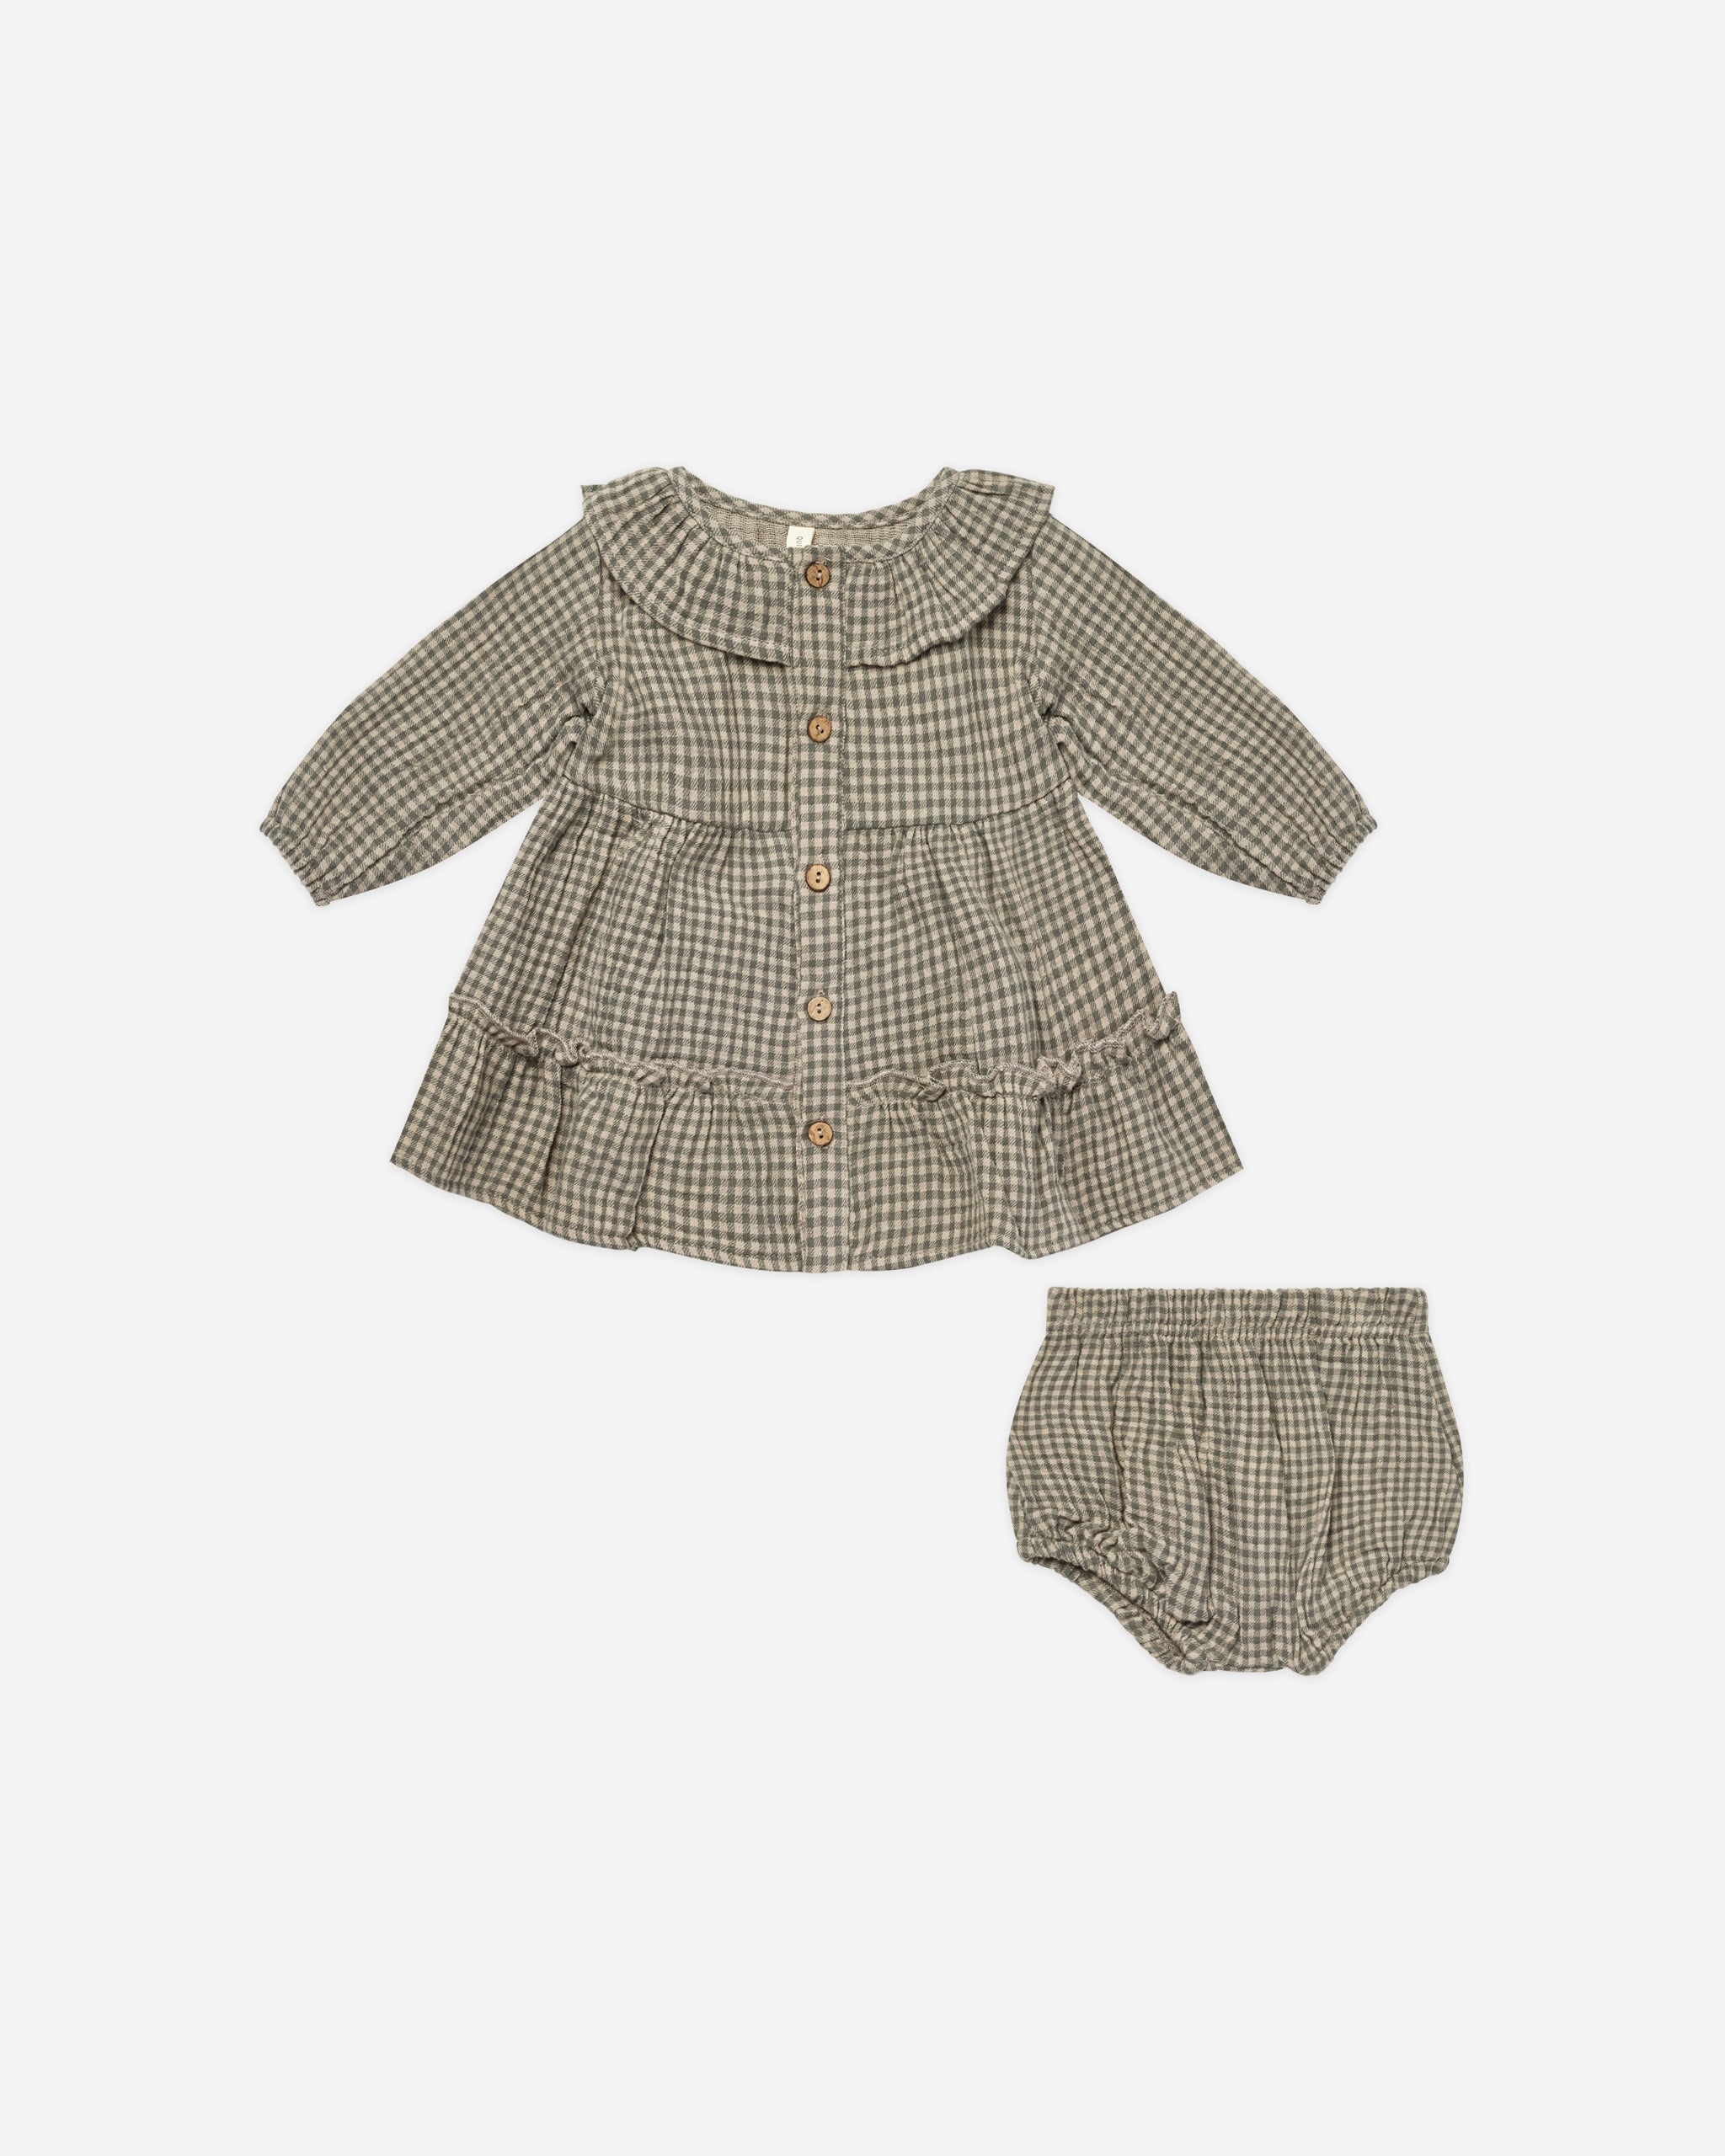 Ruffle Collar Button Dress || Forest Micro Plaid - Rylee + Cru | Kids Clothes | Trendy Baby Clothes | Modern Infant Outfits |